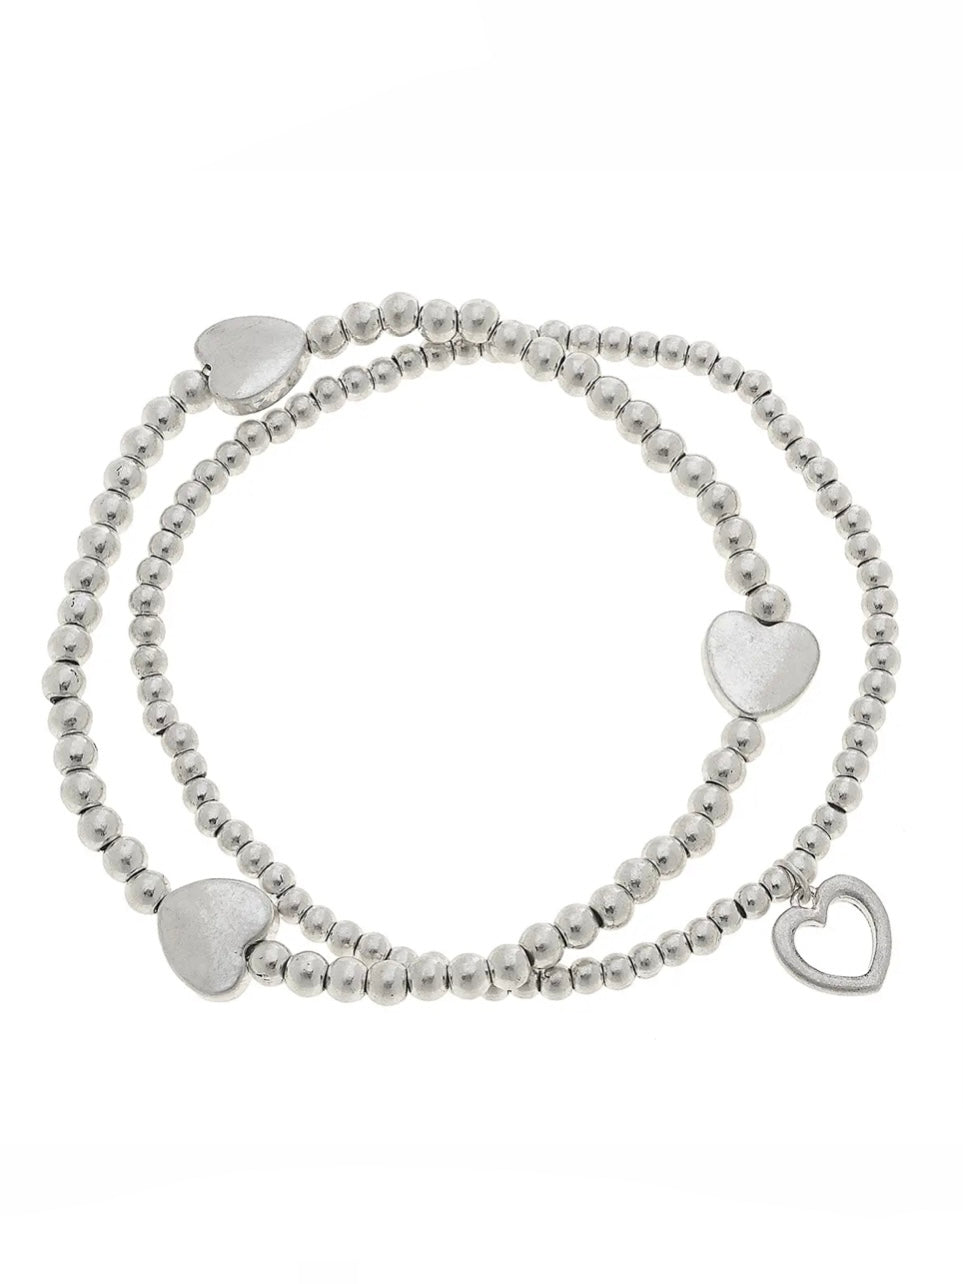 Aria Layered Bracelets in Worn Silver (Set of 2) - Hearts